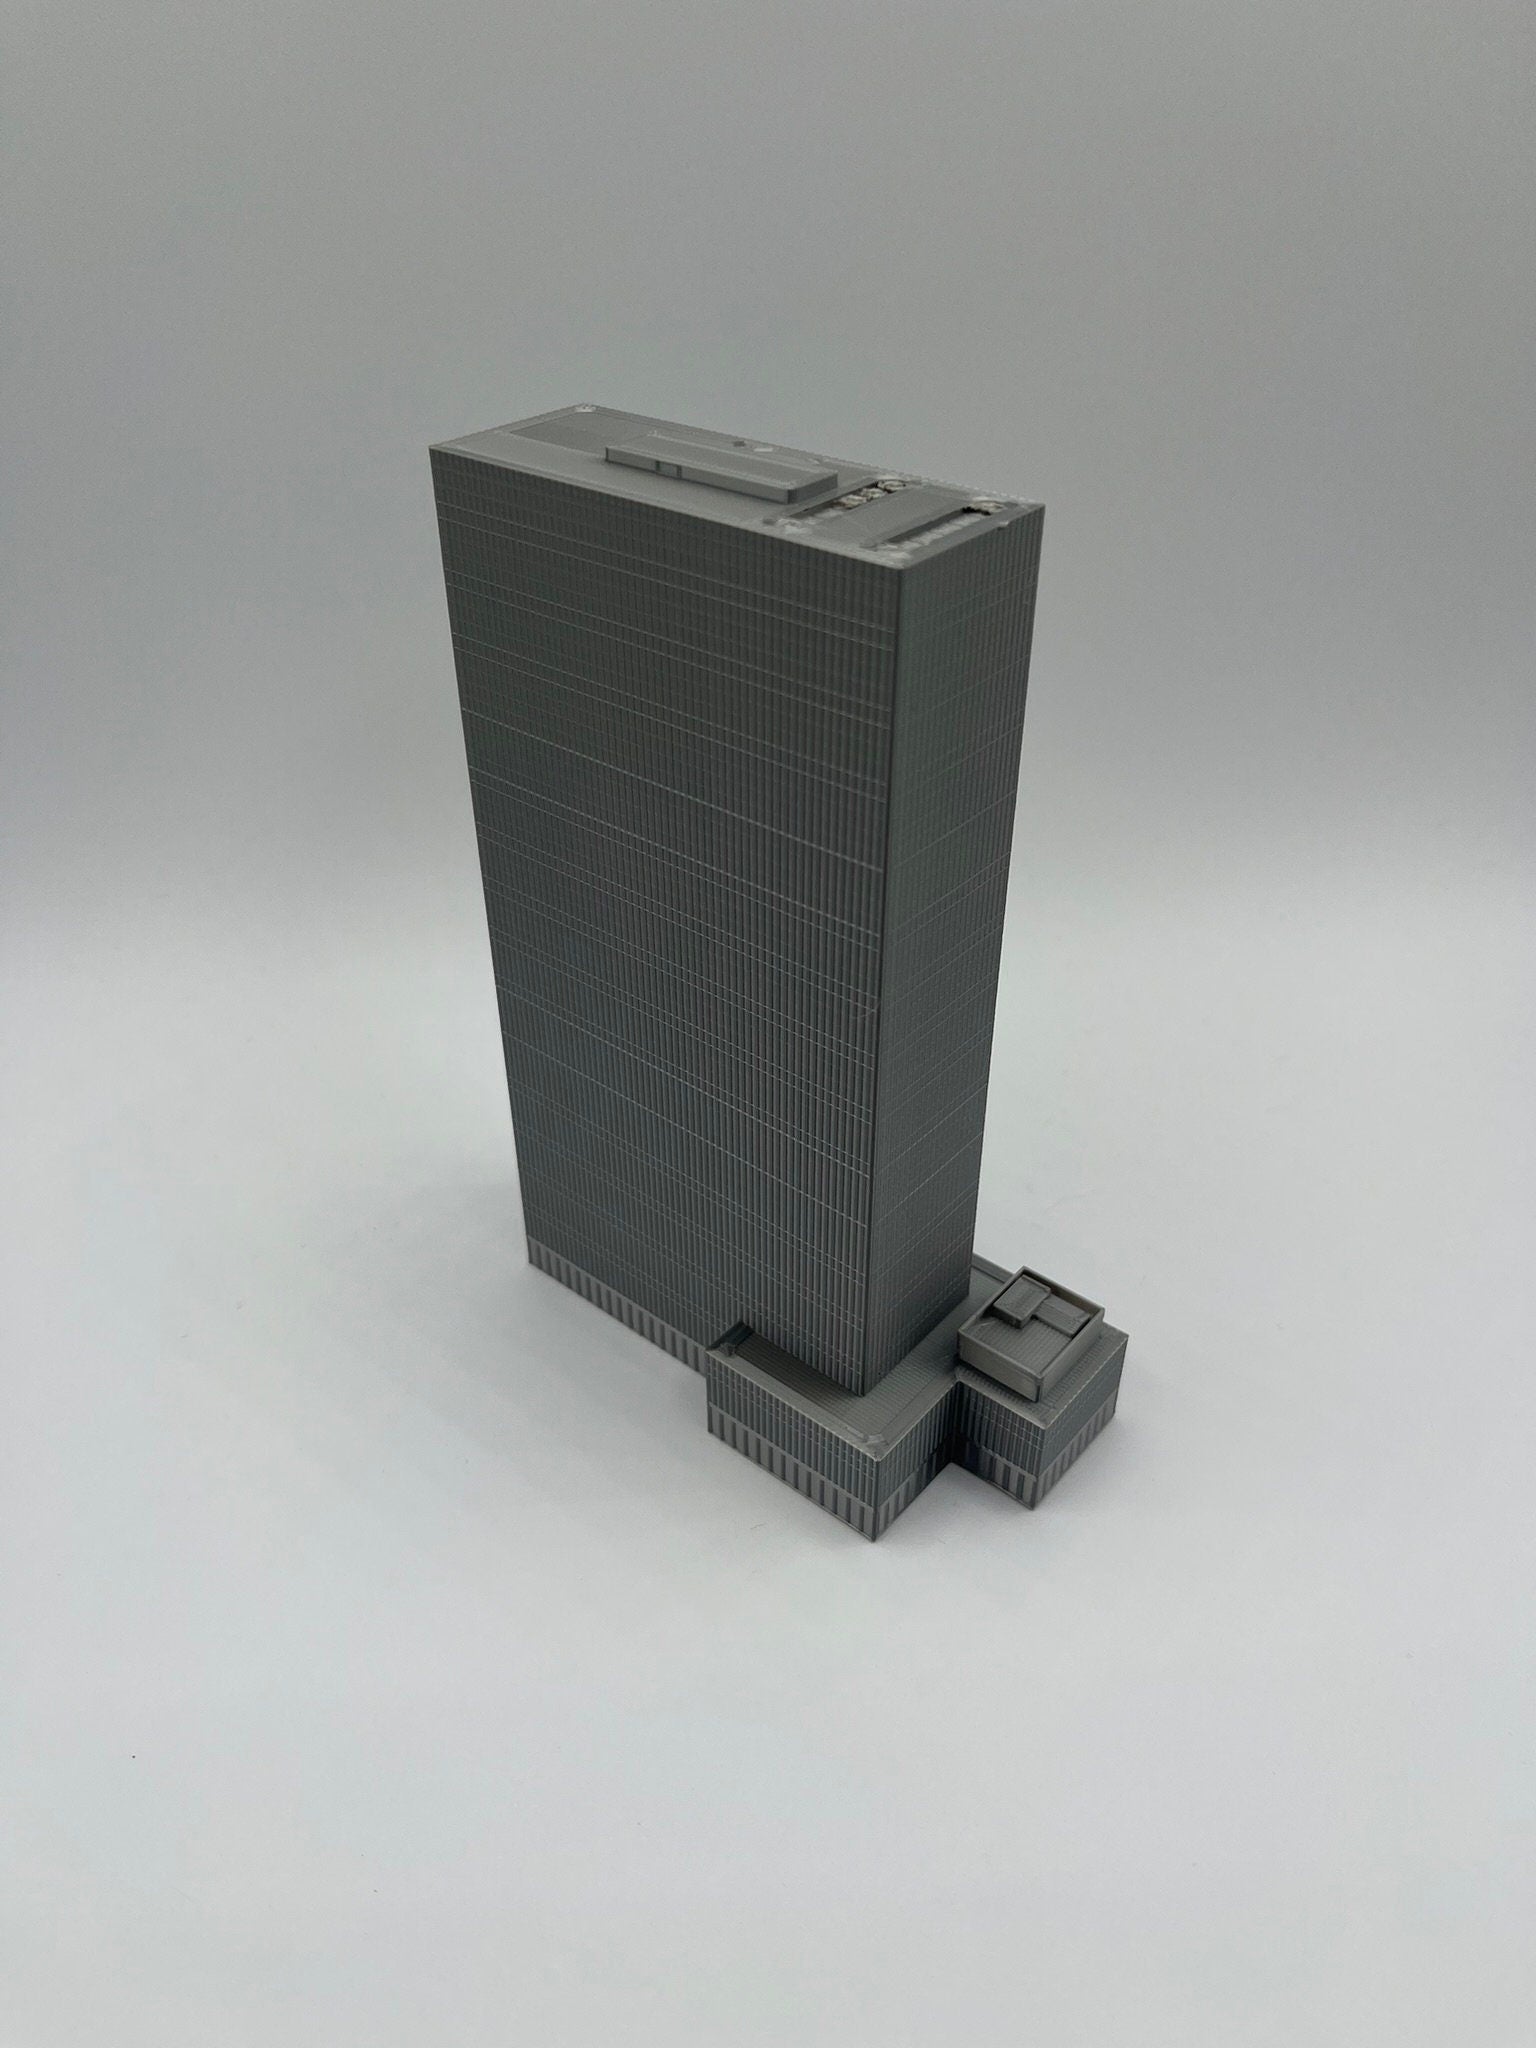 1251 Avenue of the Americas Model- 3D Printed